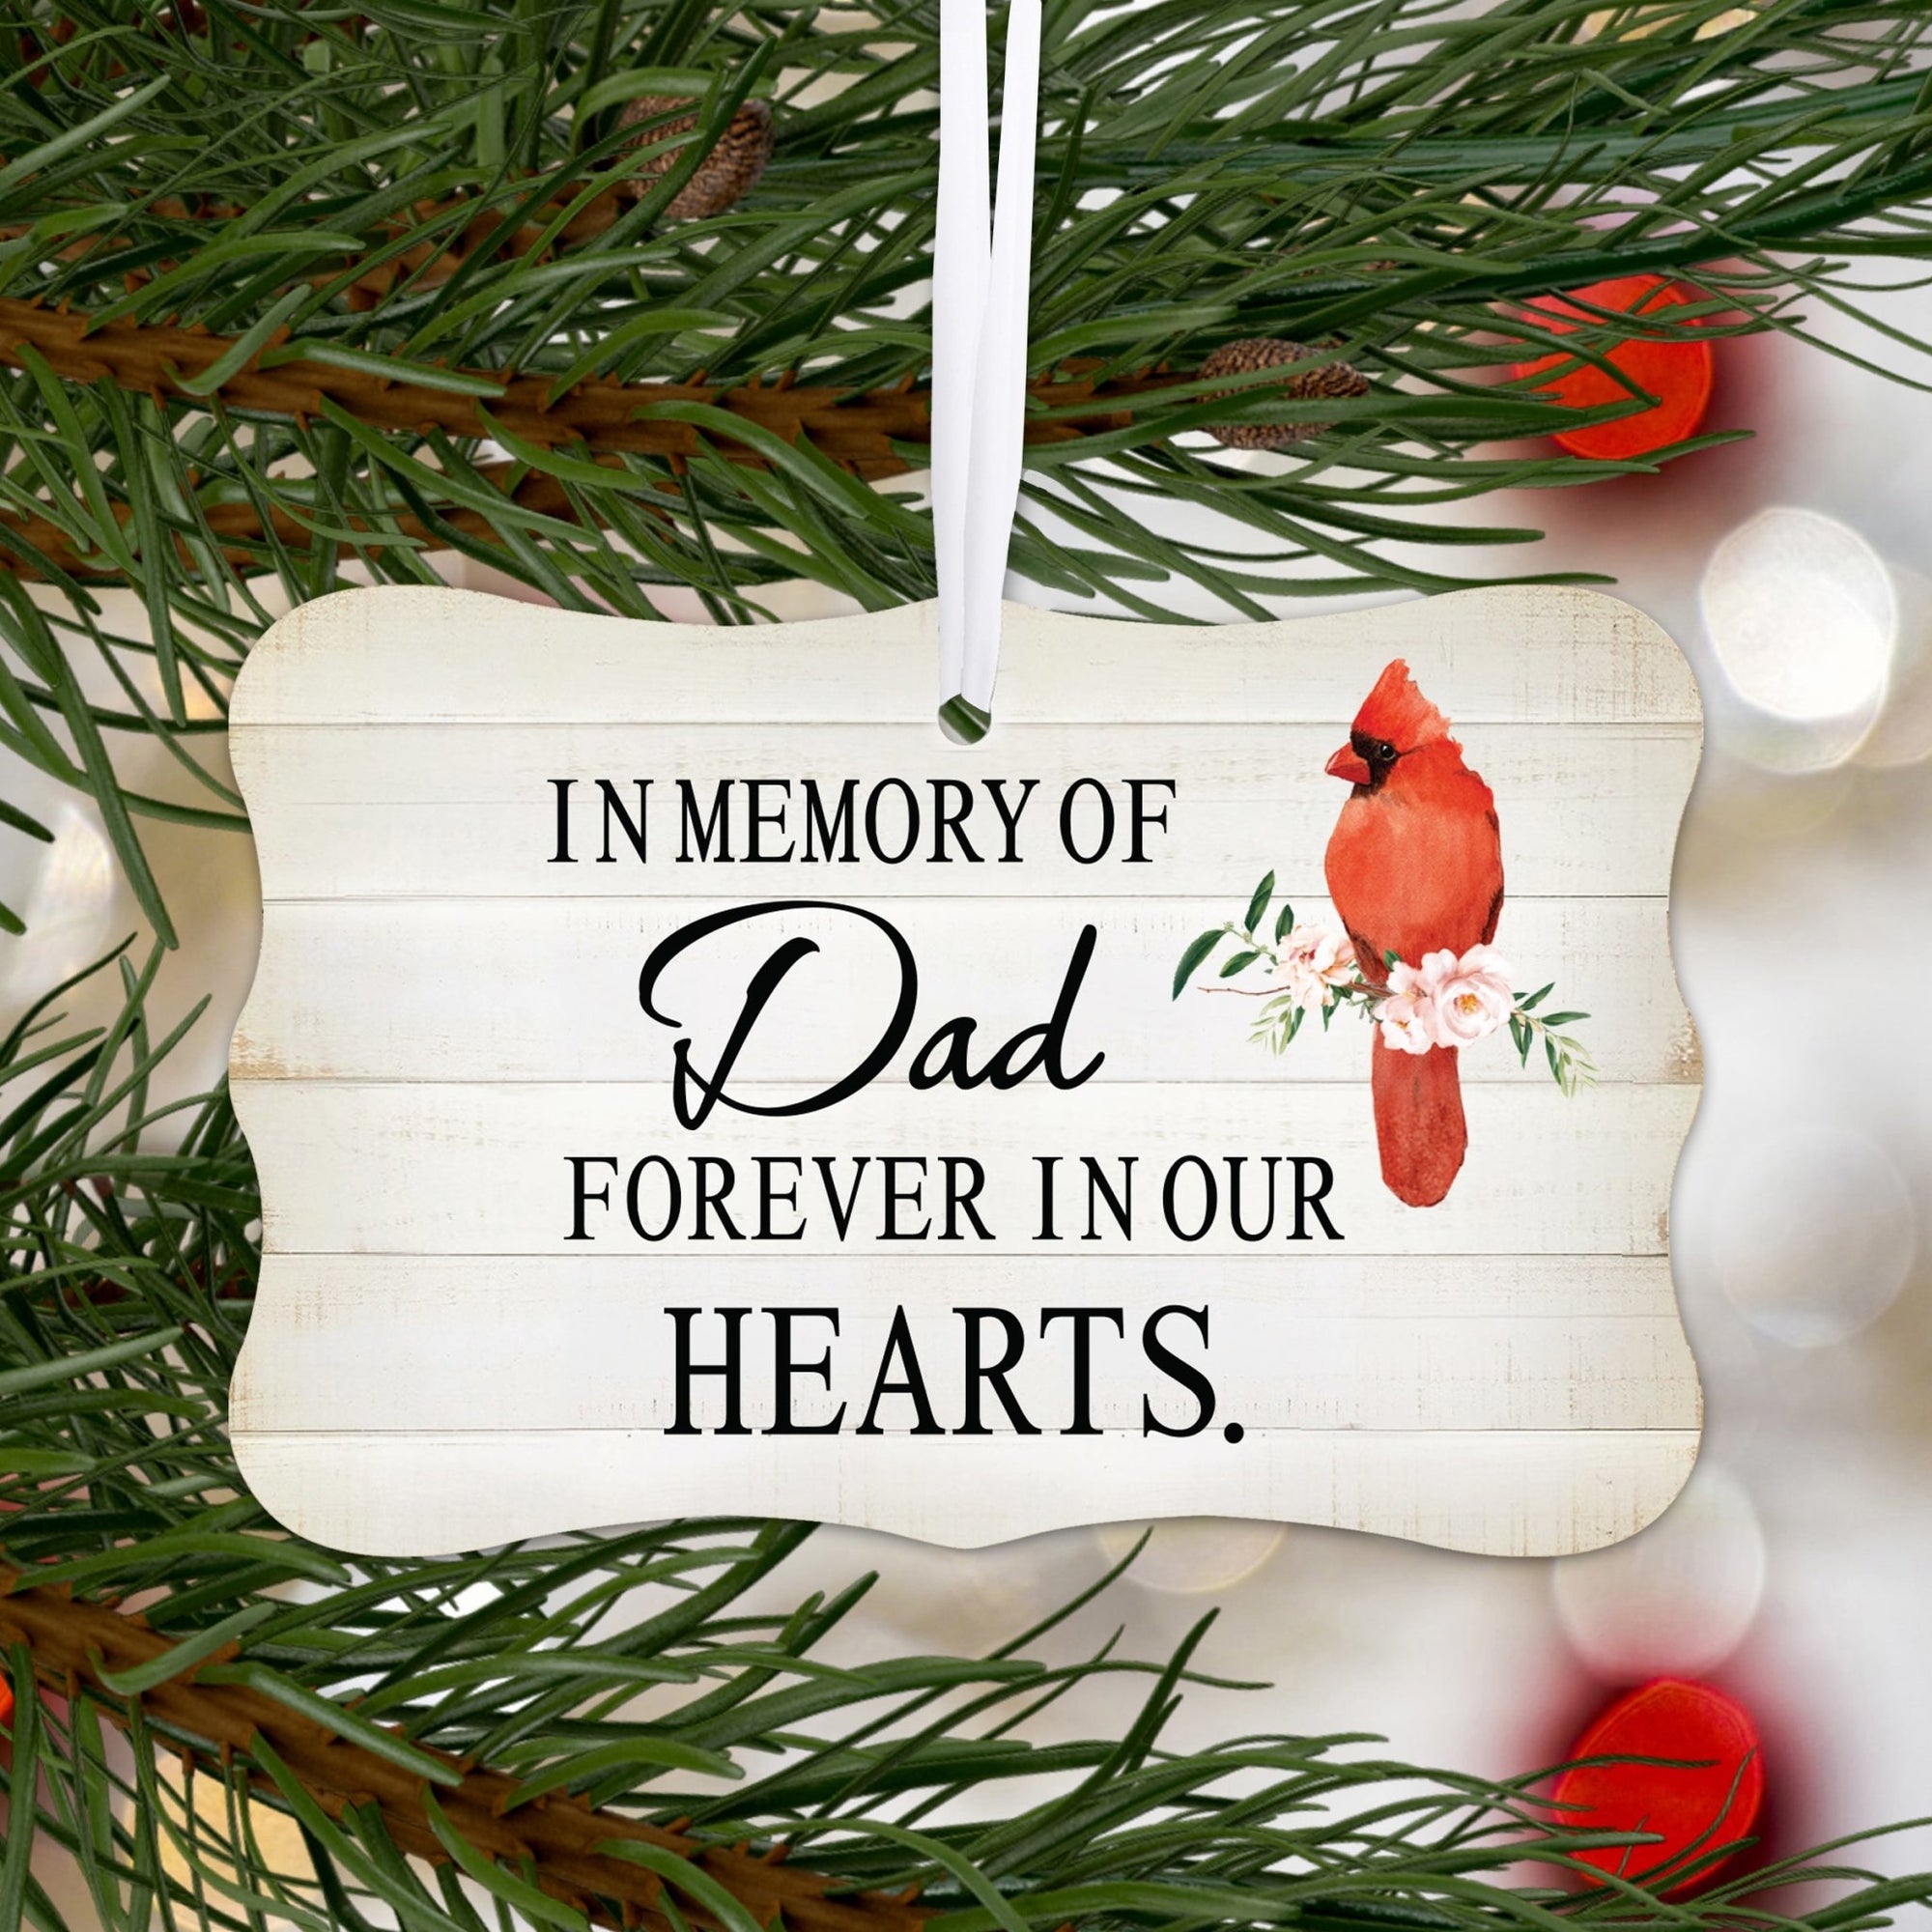 Custom Wooden Memorial Cardinal Ribbon Scalloped Ornament for Loss of Loved One - In Memory Of Dad - LifeSong Milestones